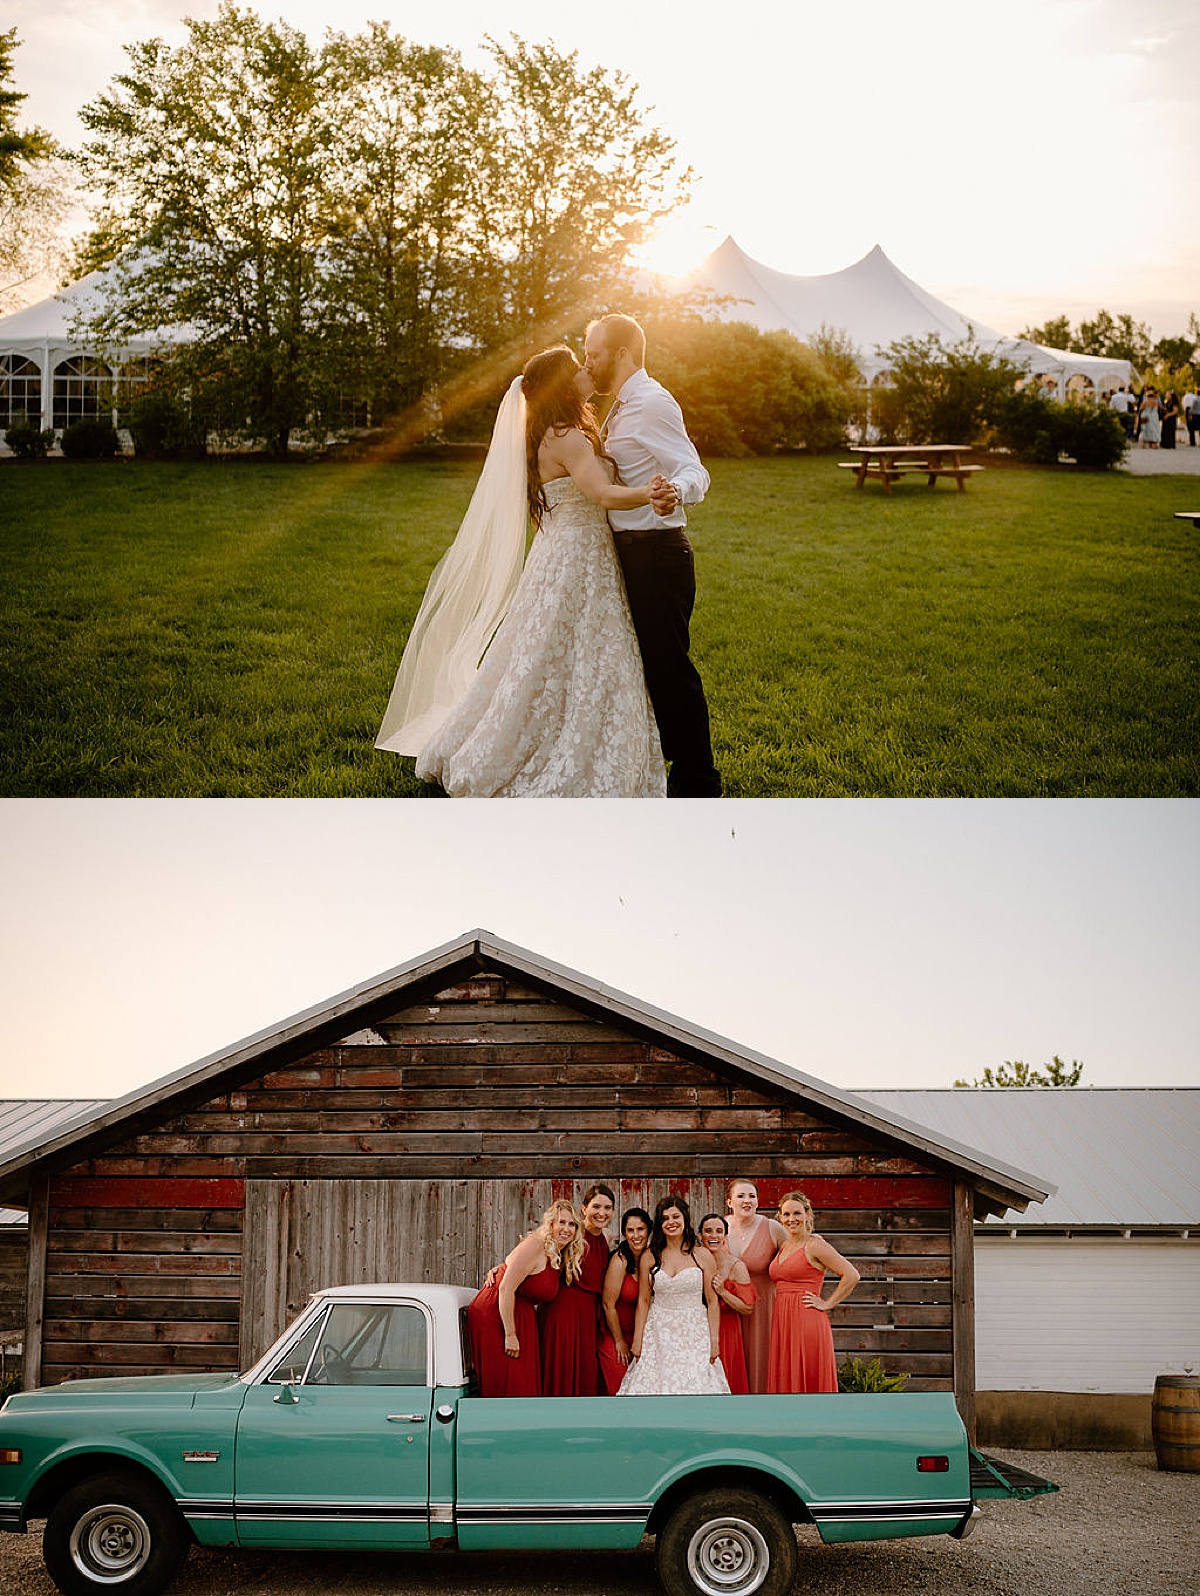 bride and groom dance on the lawn and bridal party poses in the back of vintage pickup truck | midwest wedding photographer